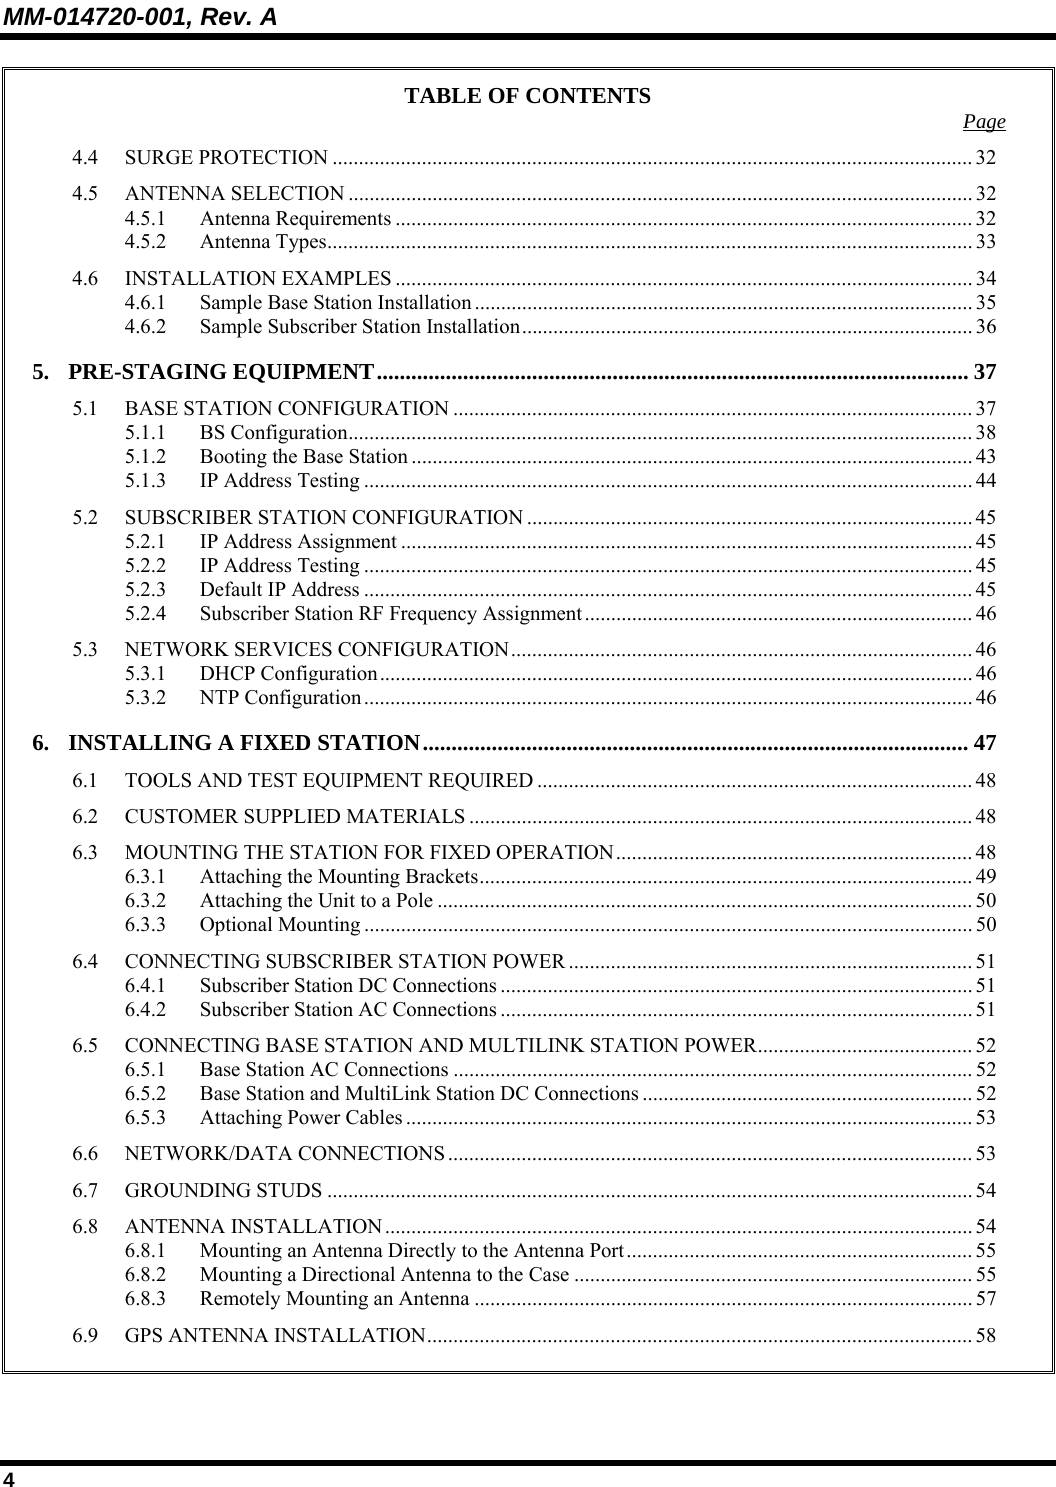 MM-014720-001, Rev. A 4 TABLE OF CONTENTS  Page 4.4 SURGE PROTECTION .......................................................................................................................... 32 4.5 ANTENNA SELECTION ....................................................................................................................... 32 4.5.1 Antenna Requirements .............................................................................................................. 32 4.5.2 Antenna Types........................................................................................................................... 33 4.6 INSTALLATION EXAMPLES .............................................................................................................. 34 4.6.1 Sample Base Station Installation ............................................................................................... 35 4.6.2 Sample Subscriber Station Installation...................................................................................... 36 5. PRE-STAGING EQUIPMENT....................................................................................................... 37 5.1 BASE STATION CONFIGURATION ................................................................................................... 37 5.1.1 BS Configuration....................................................................................................................... 38 5.1.2 Booting the Base Station ........................................................................................................... 43 5.1.3 IP Address Testing .................................................................................................................... 44 5.2 SUBSCRIBER STATION CONFIGURATION ..................................................................................... 45 5.2.1 IP Address Assignment ............................................................................................................. 45 5.2.2 IP Address Testing .................................................................................................................... 45 5.2.3 Default IP Address .................................................................................................................... 45 5.2.4 Subscriber Station RF Frequency Assignment.......................................................................... 46 5.3 NETWORK SERVICES CONFIGURATION........................................................................................ 46 5.3.1 DHCP Configuration................................................................................................................. 46 5.3.2 NTP Configuration.................................................................................................................... 46 6. INSTALLING A FIXED STATION............................................................................................... 47 6.1 TOOLS AND TEST EQUIPMENT REQUIRED ................................................................................... 48 6.2 CUSTOMER SUPPLIED MATERIALS ................................................................................................ 48 6.3 MOUNTING THE STATION FOR FIXED OPERATION.................................................................... 48 6.3.1 Attaching the Mounting Brackets.............................................................................................. 49 6.3.2 Attaching the Unit to a Pole ...................................................................................................... 50 6.3.3 Optional Mounting .................................................................................................................... 50 6.4 CONNECTING SUBSCRIBER STATION POWER ............................................................................. 51 6.4.1 Subscriber Station DC Connections .......................................................................................... 51 6.4.2 Subscriber Station AC Connections .......................................................................................... 51 6.5 CONNECTING BASE STATION AND MULTILINK STATION POWER......................................... 52 6.5.1 Base Station AC Connections ................................................................................................... 52 6.5.2 Base Station and MultiLink Station DC Connections ............................................................... 52 6.5.3 Attaching Power Cables ............................................................................................................ 53 6.6 NETWORK/DATA CONNECTIONS .................................................................................................... 53 6.7 GROUNDING STUDS ........................................................................................................................... 54 6.8 ANTENNA INSTALLATION................................................................................................................ 54 6.8.1 Mounting an Antenna Directly to the Antenna Port.................................................................. 55 6.8.2 Mounting a Directional Antenna to the Case ............................................................................ 55 6.8.3 Remotely Mounting an Antenna ............................................................................................... 57 6.9 GPS ANTENNA INSTALLATION........................................................................................................58  